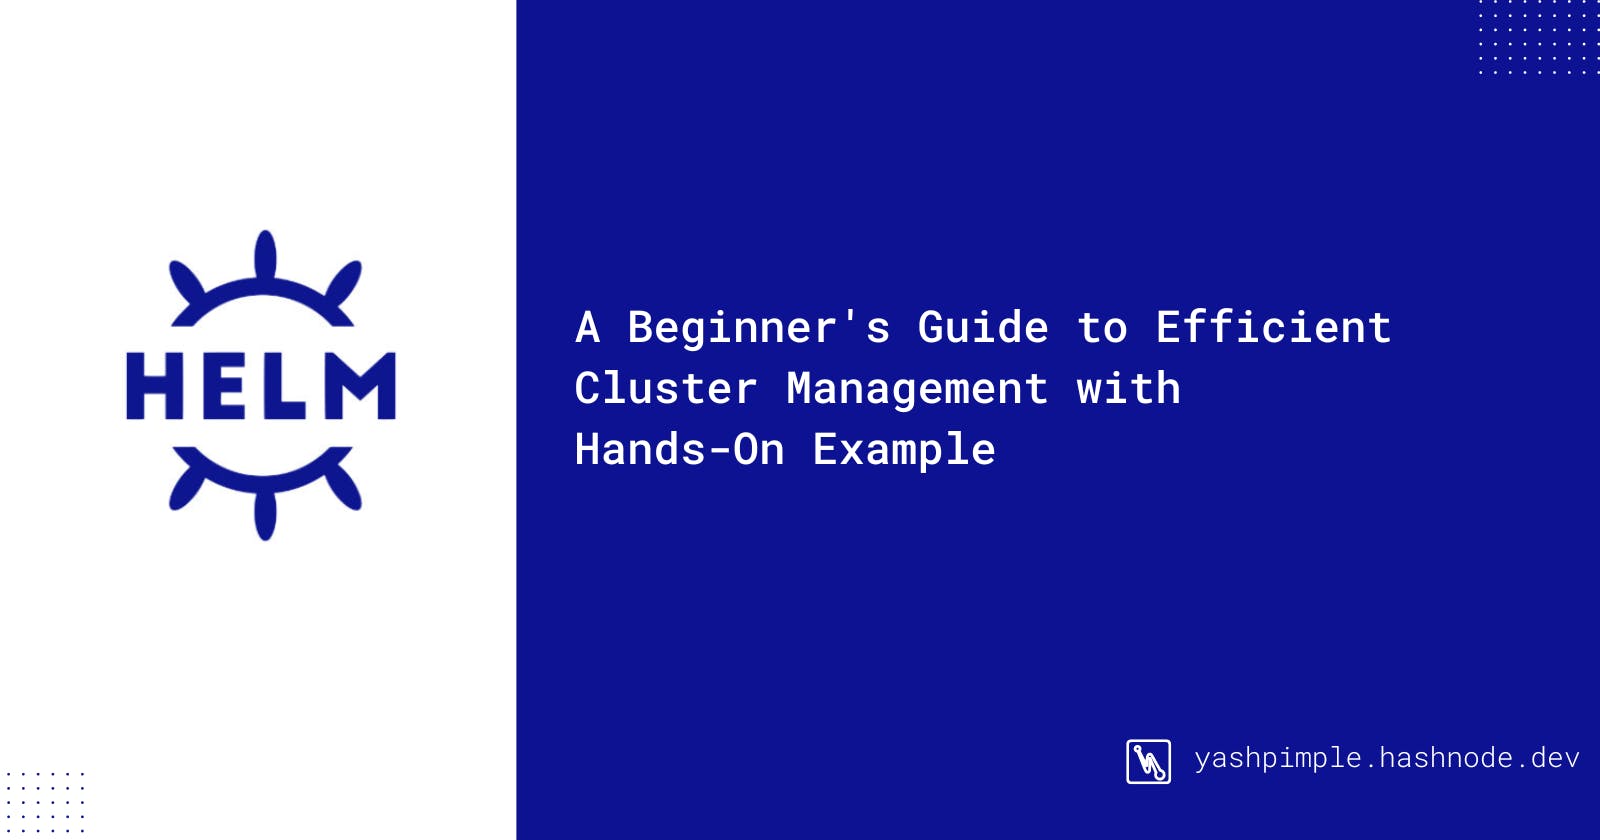 Helm 101: A Beginner's Guide to Efficient Cluster Management with Hands-On Examples